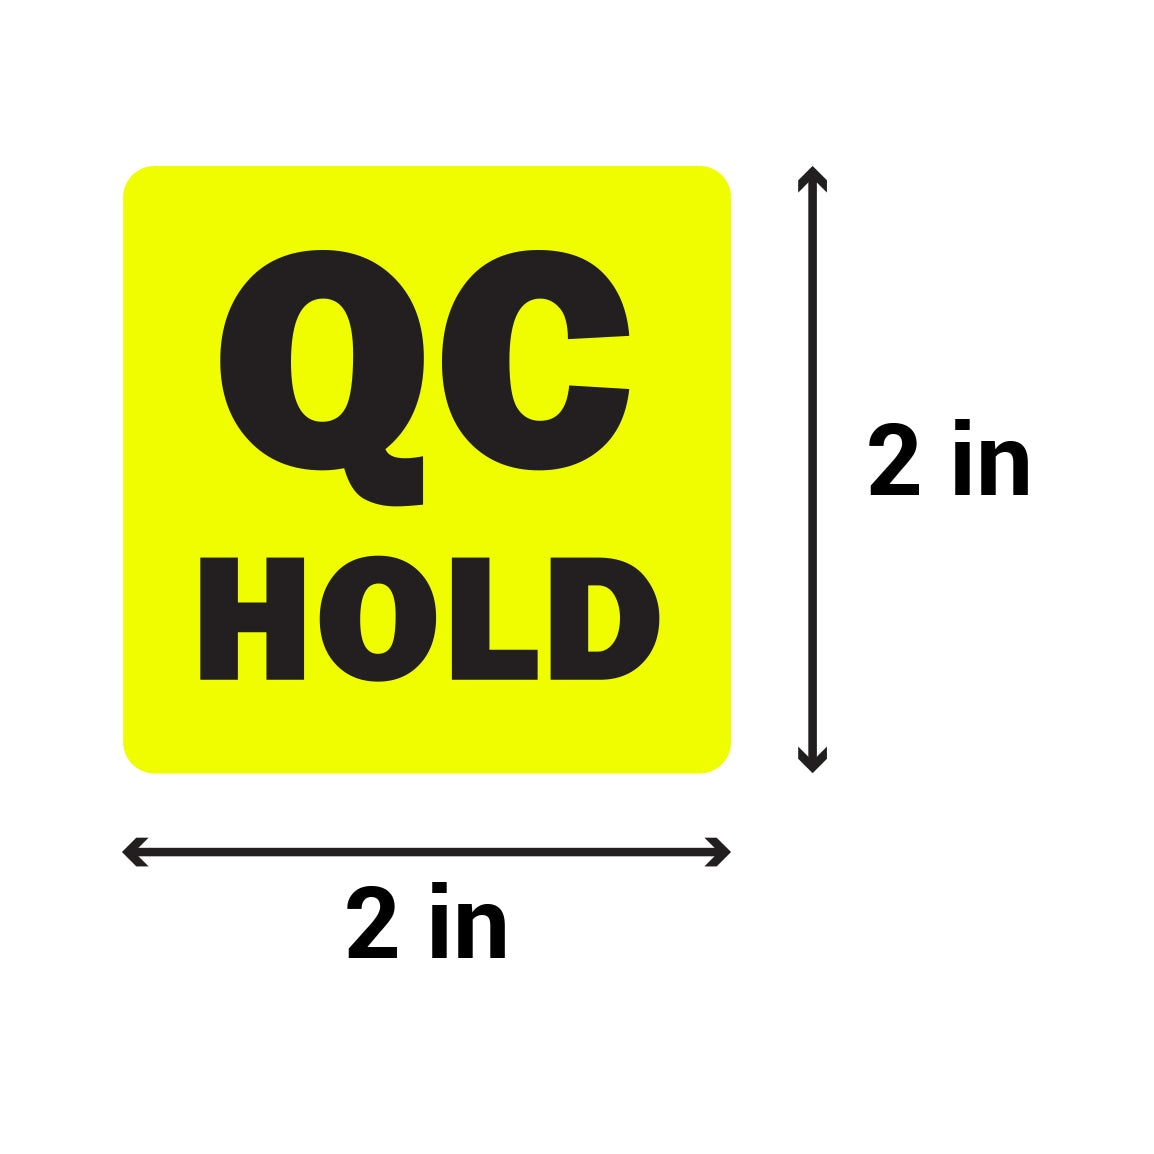 2 x 2 inch | Quality Control: QC Hold Stickers